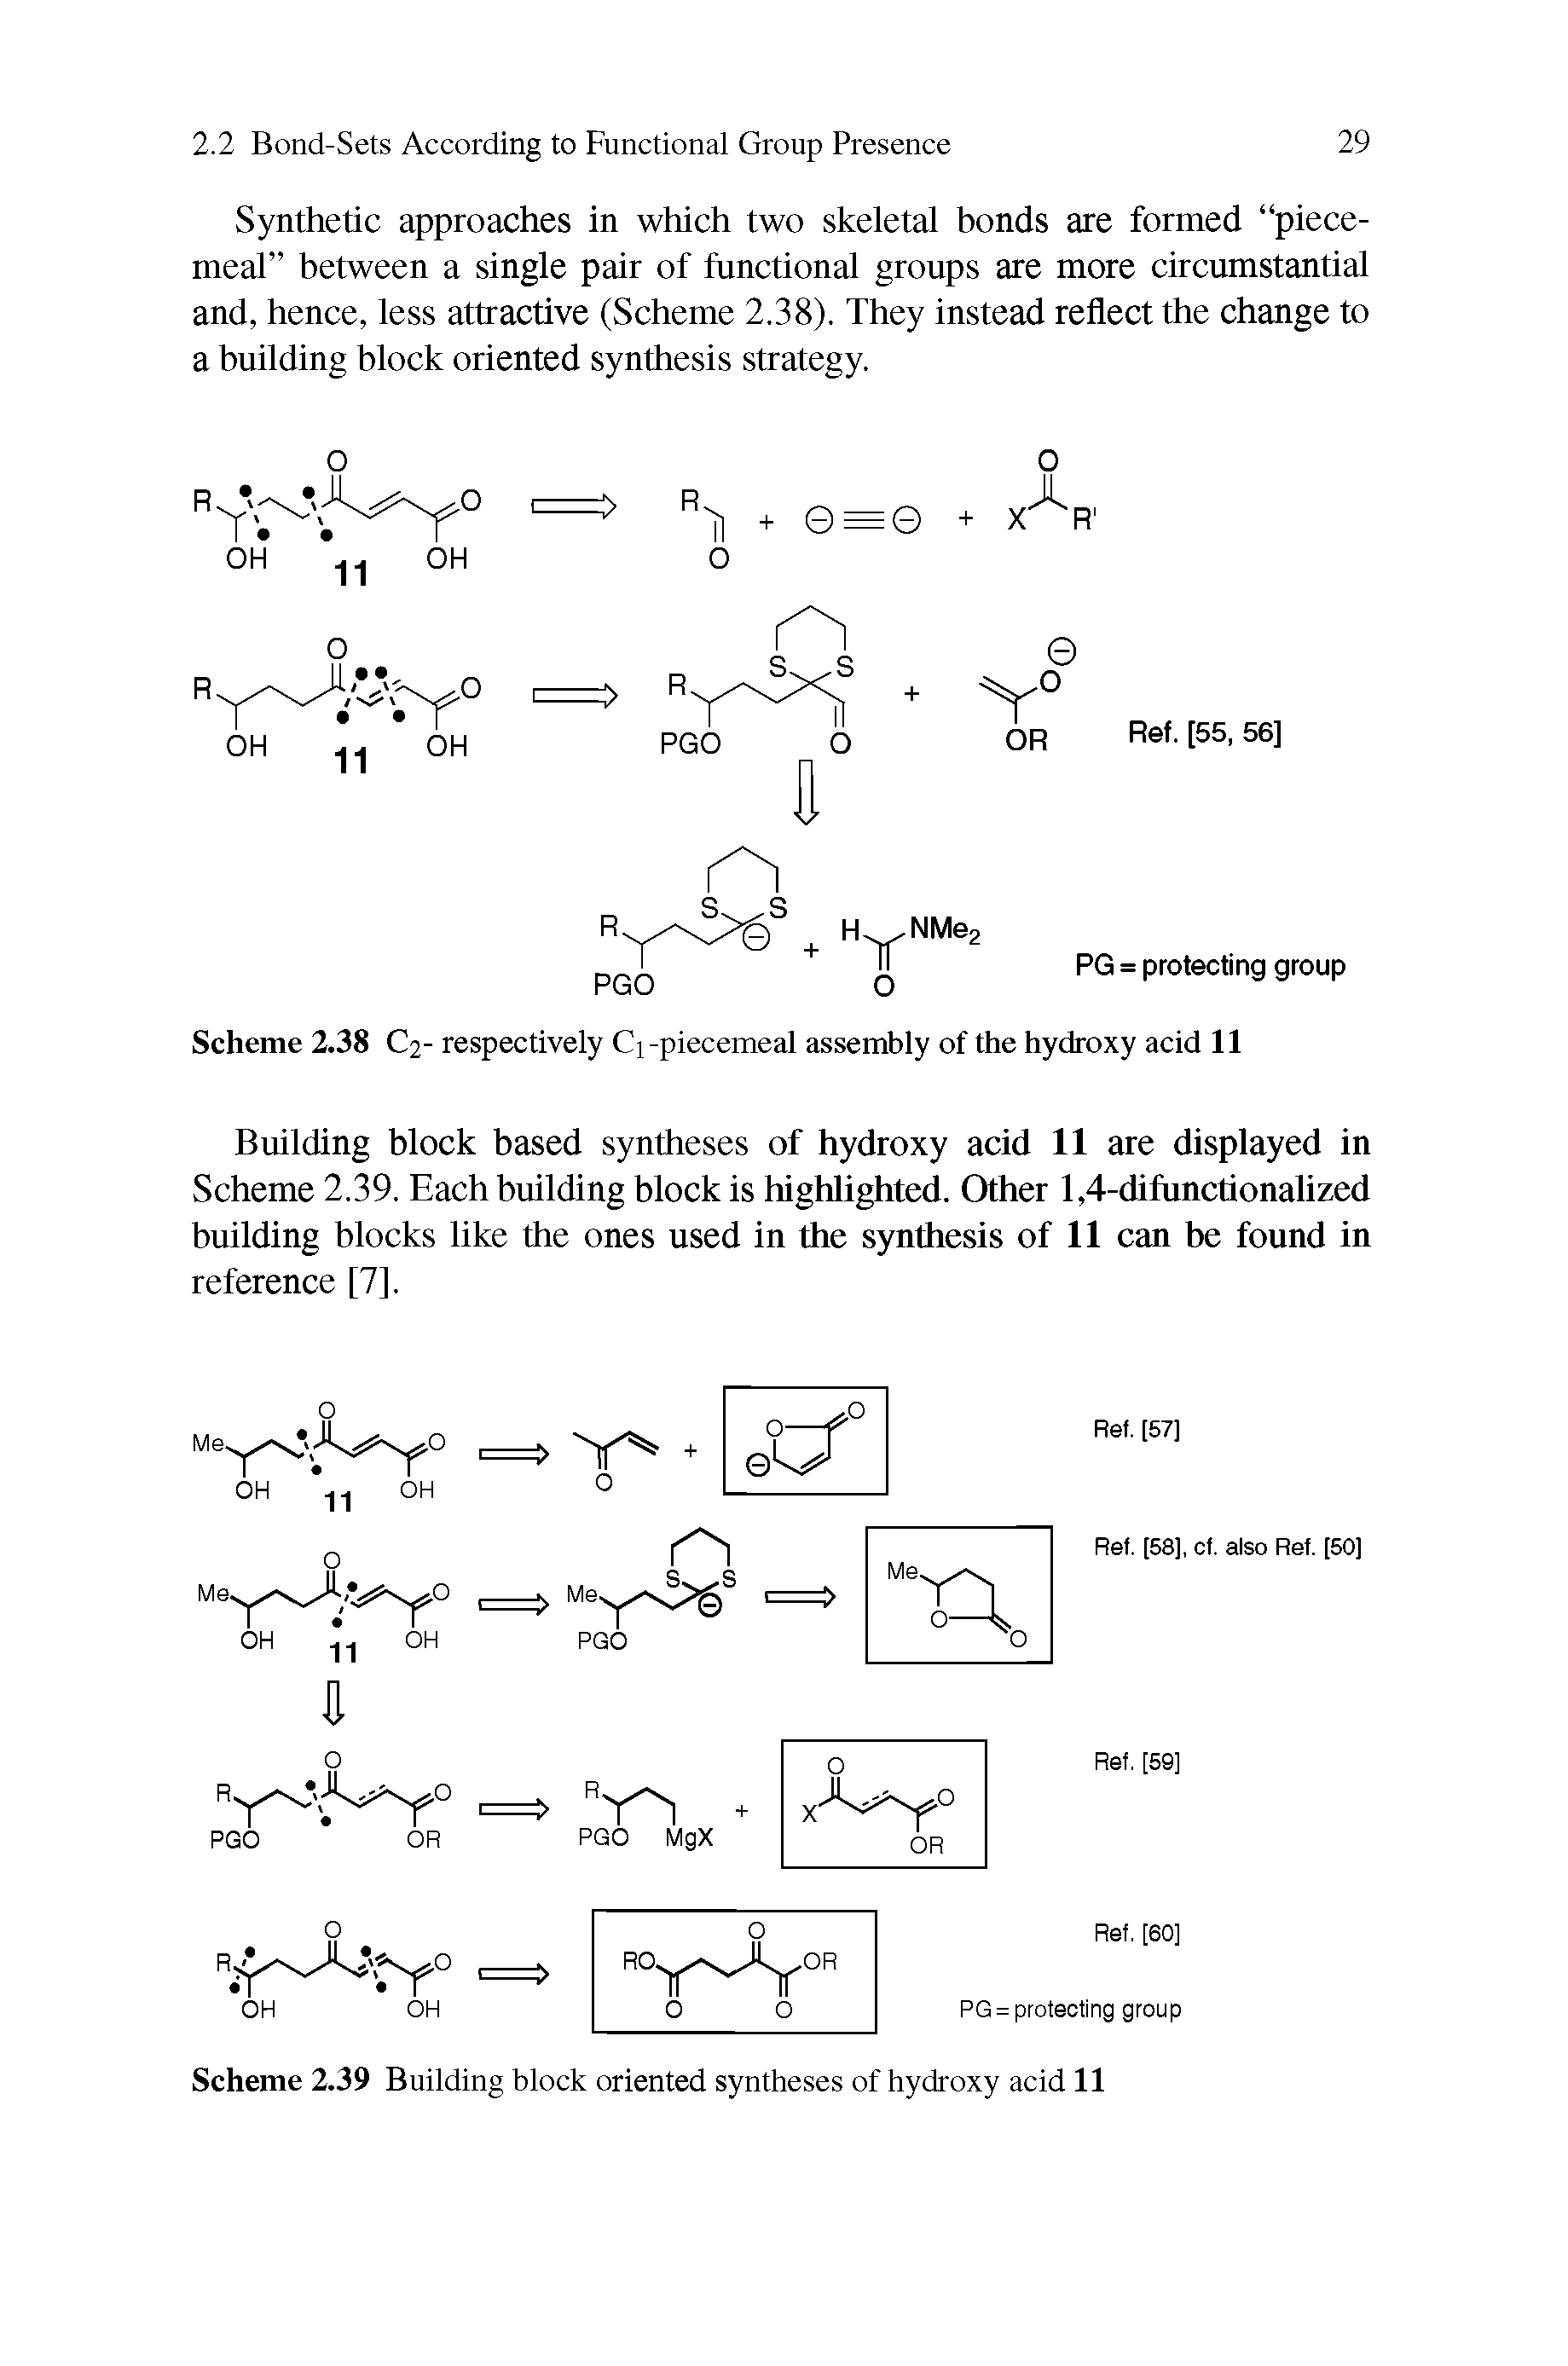 Scheme 2.39 Building block oriented syntheses of hydroxy acid 11...